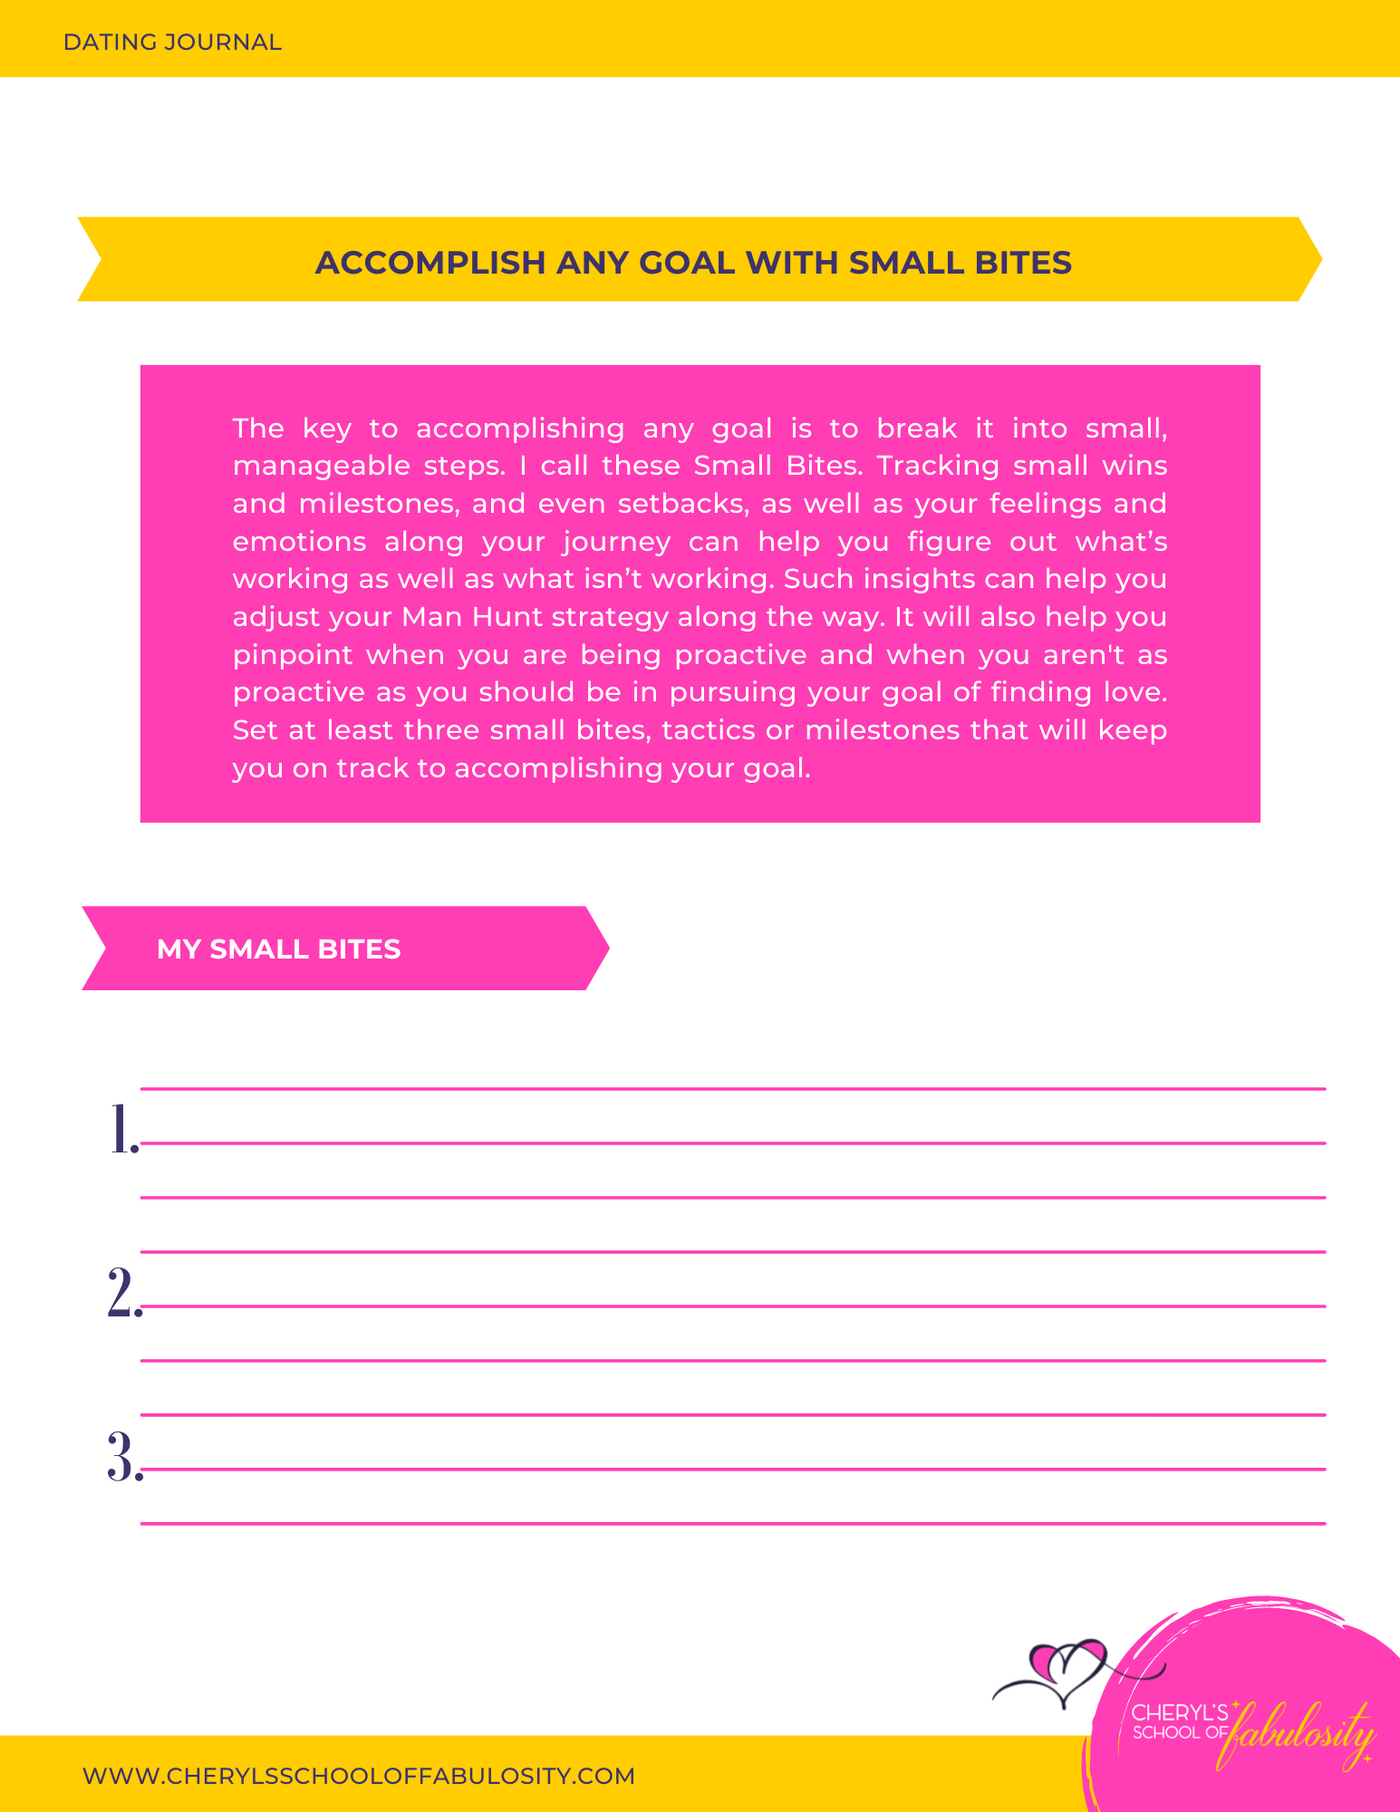 THE FAB GIRL'S DATING JOURNAL (ALSO KNOWN AS THE FROG KISSING TRACKER!)